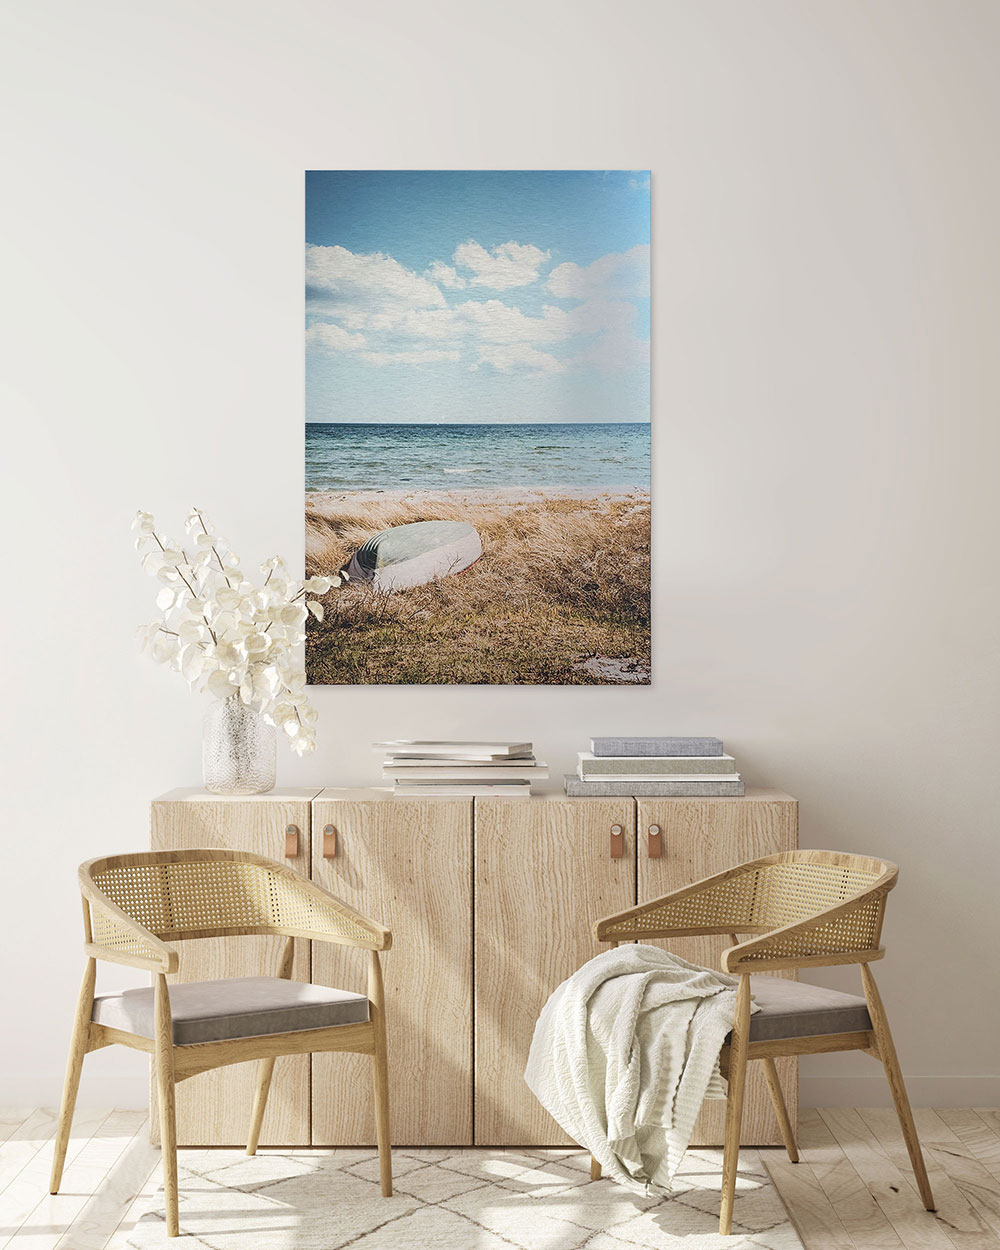 Brushed aluminum metal photo print made in Canada by Canvas n Decor